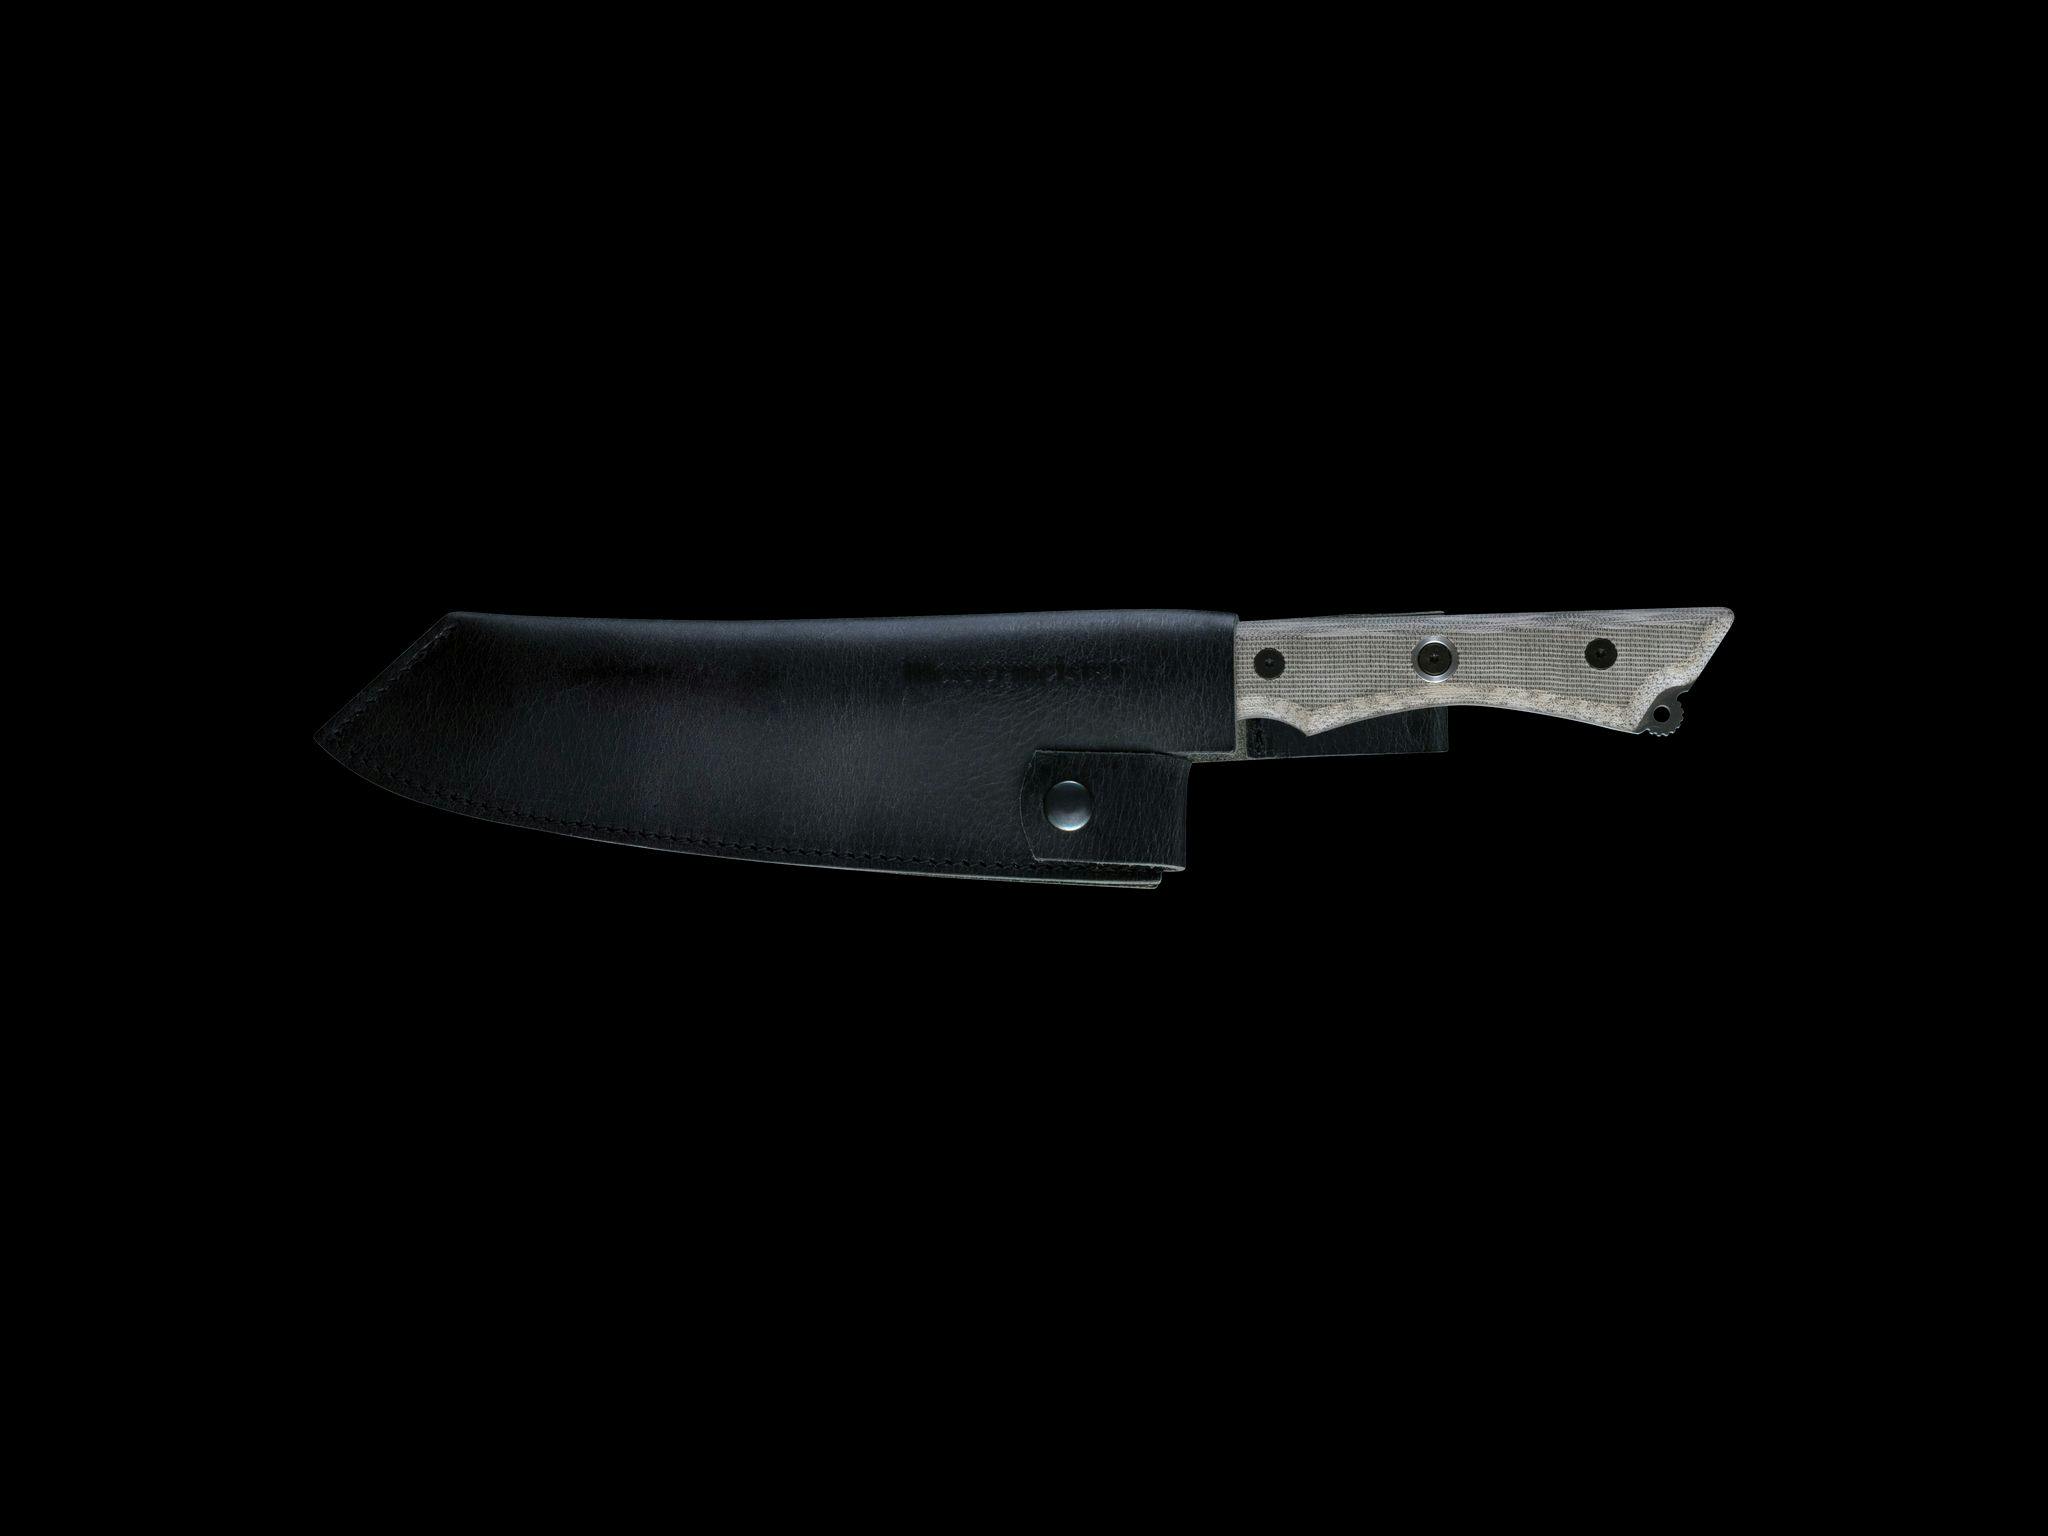 Overland, 8 Inch, Chef's Knife